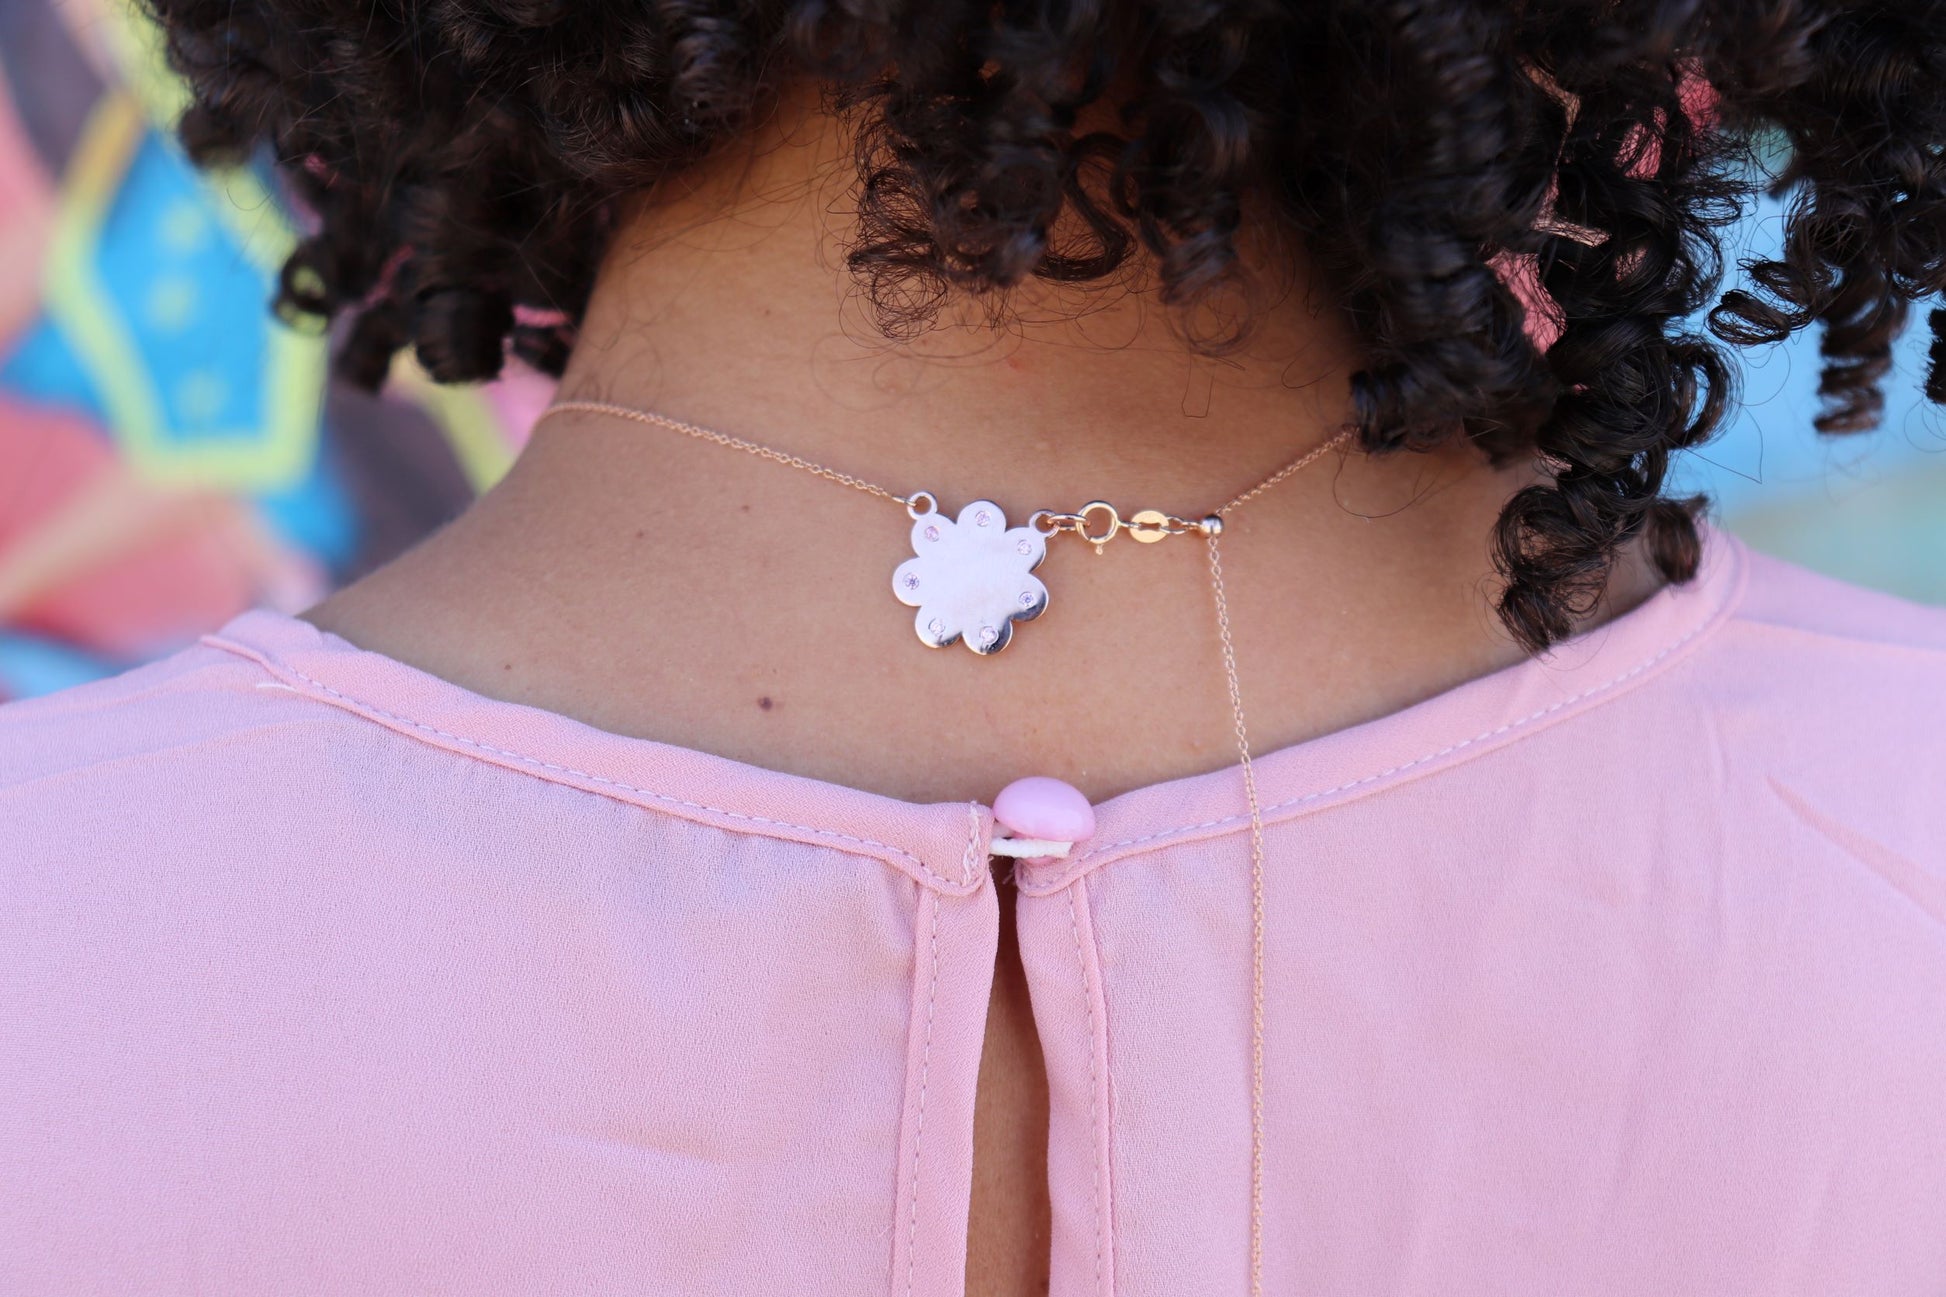 black woman with curly hair in a pink top  turned away from the camera wearing a Seven diamond logo charm on a gold cloud with seven diamonds set evenly around the cloud from the wandering jewel